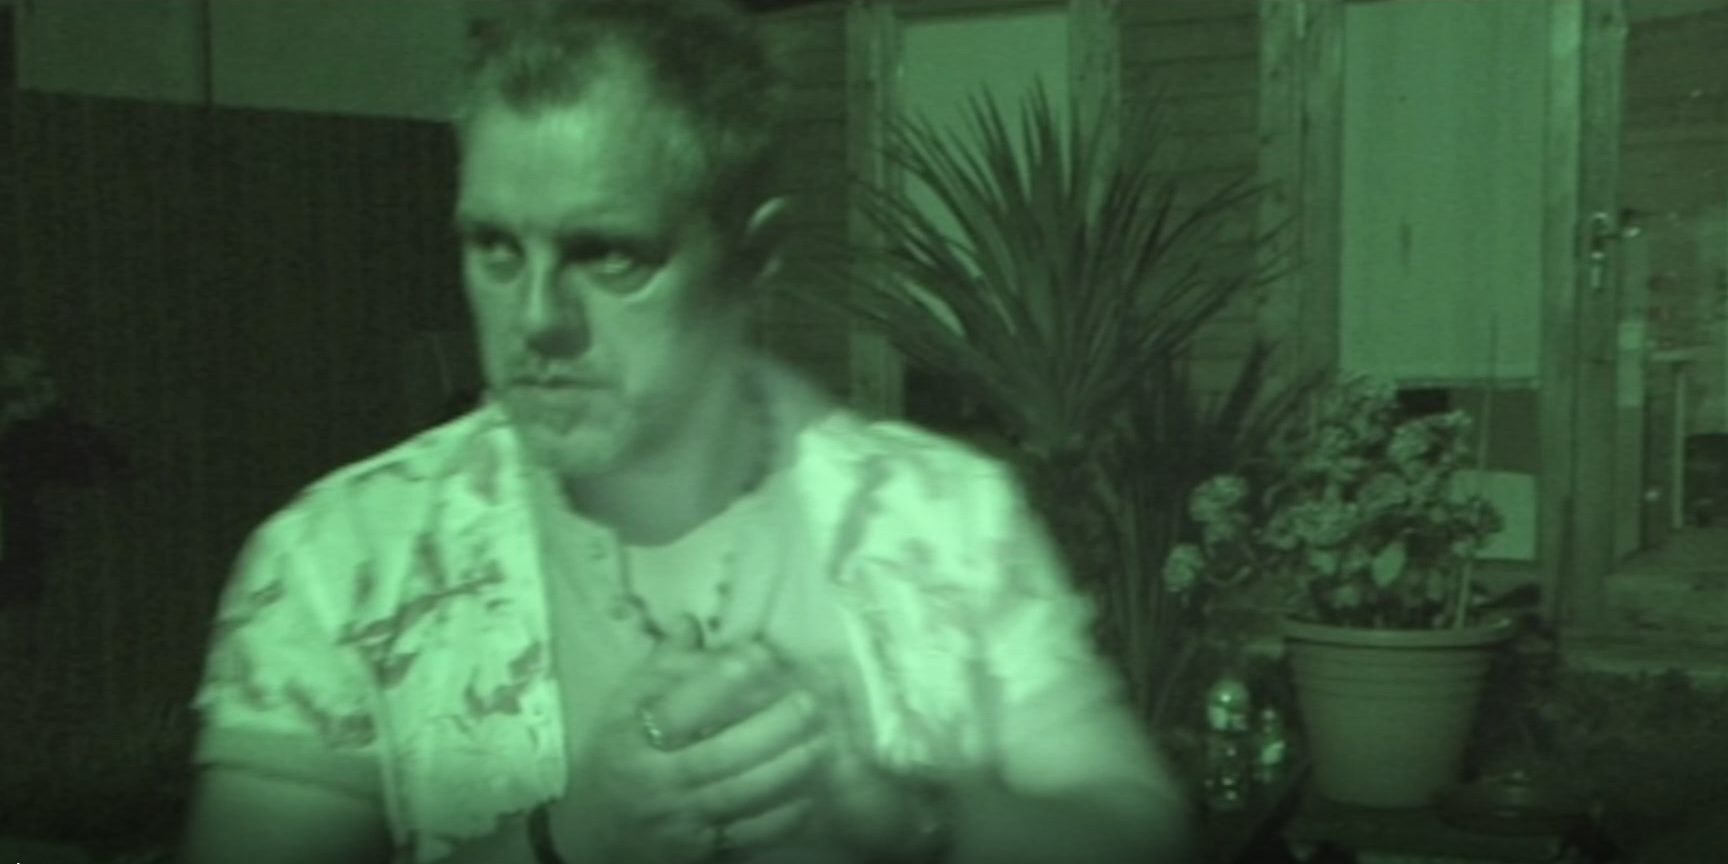 Richard offering help with paranormal activity to south Wales family